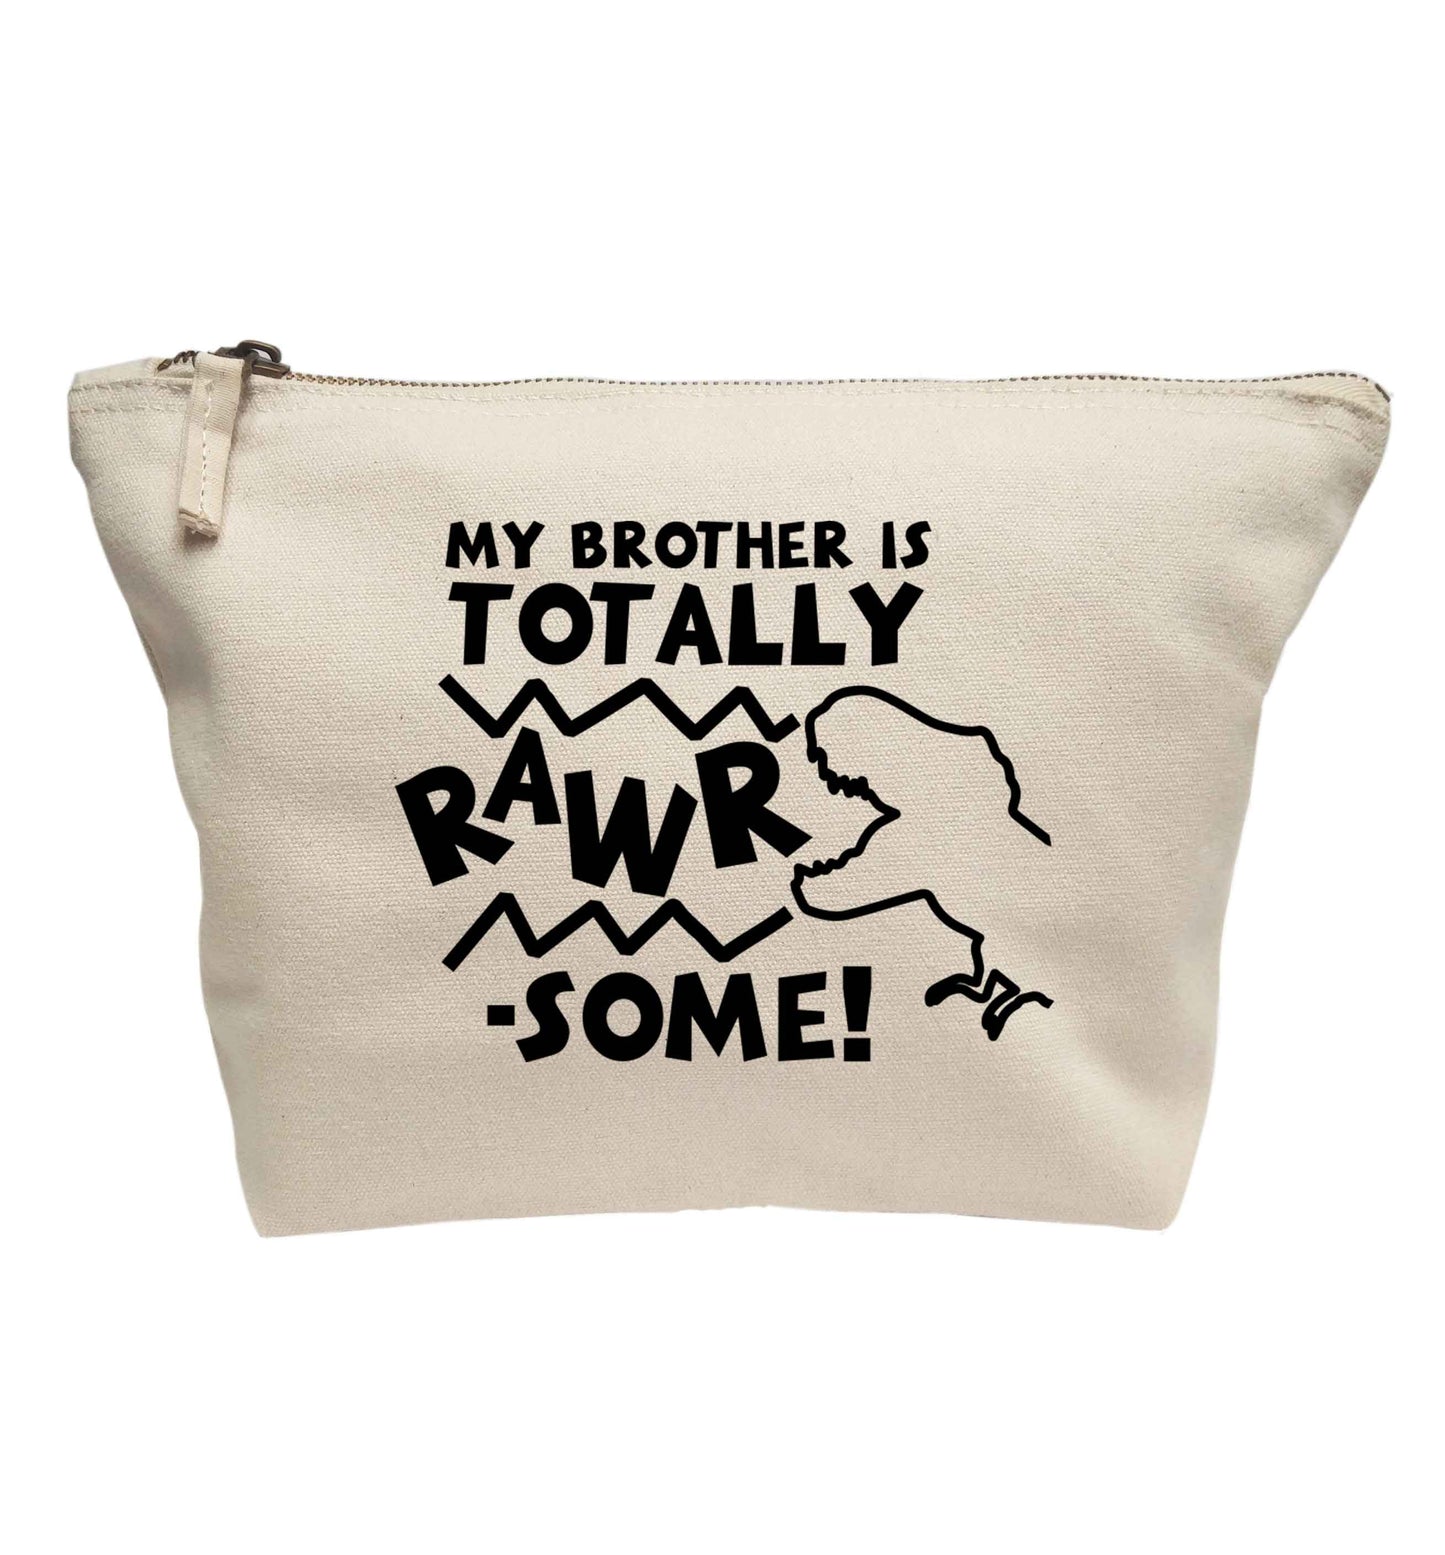 My brother is totally rawrsome | Makeup / wash bag